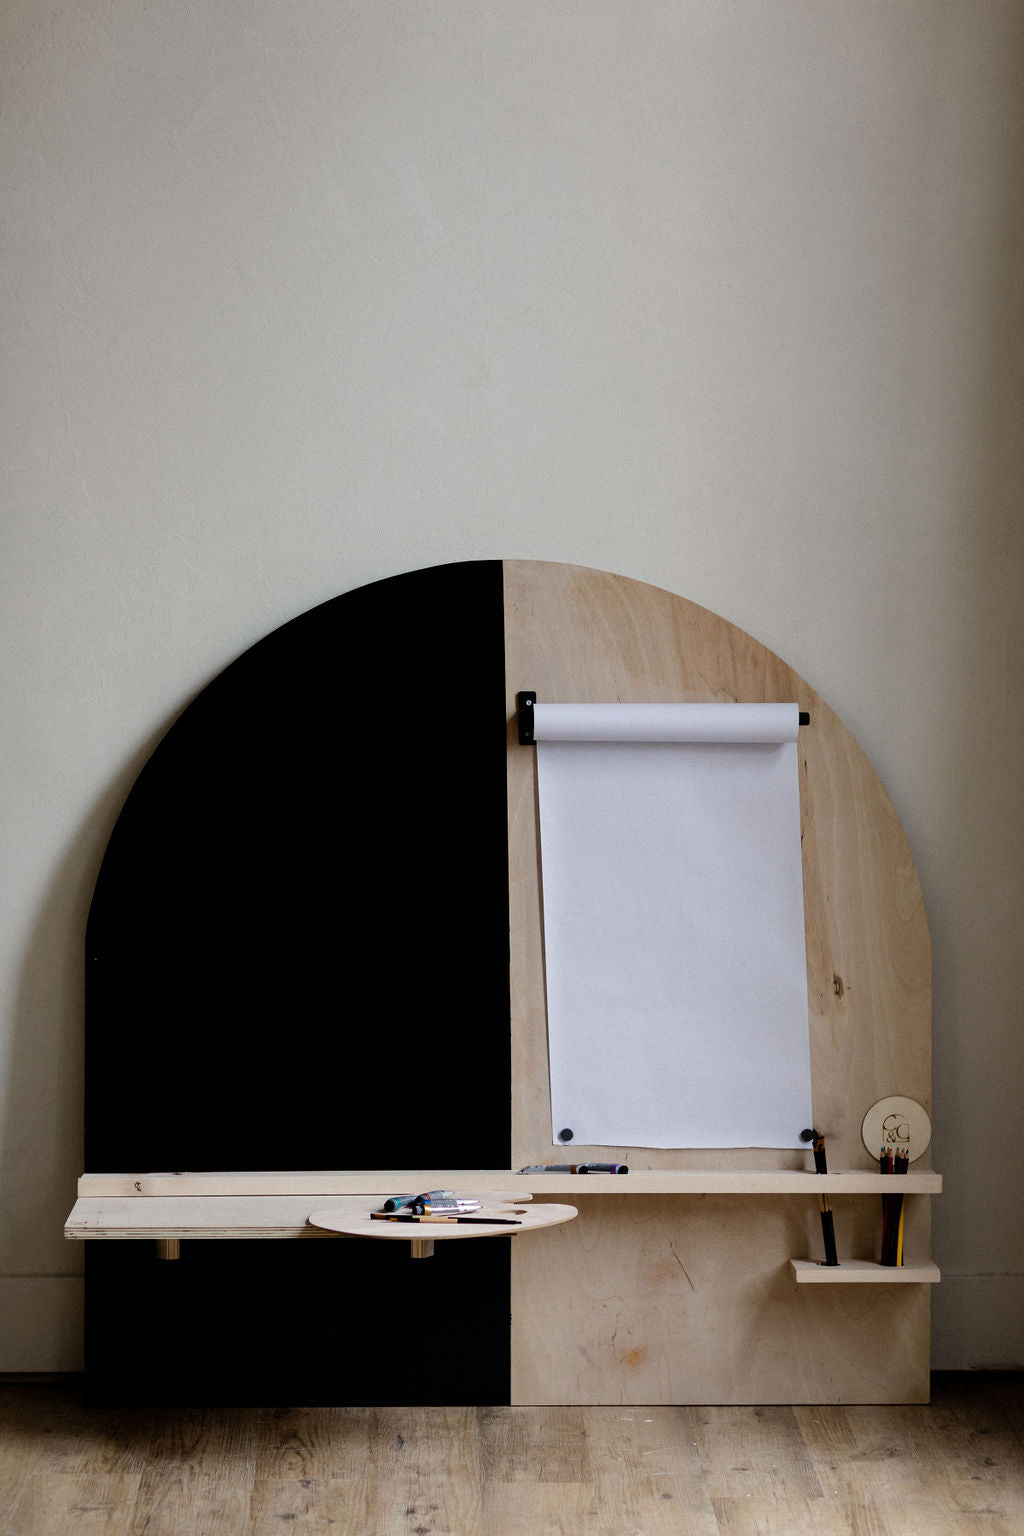 Large Easel